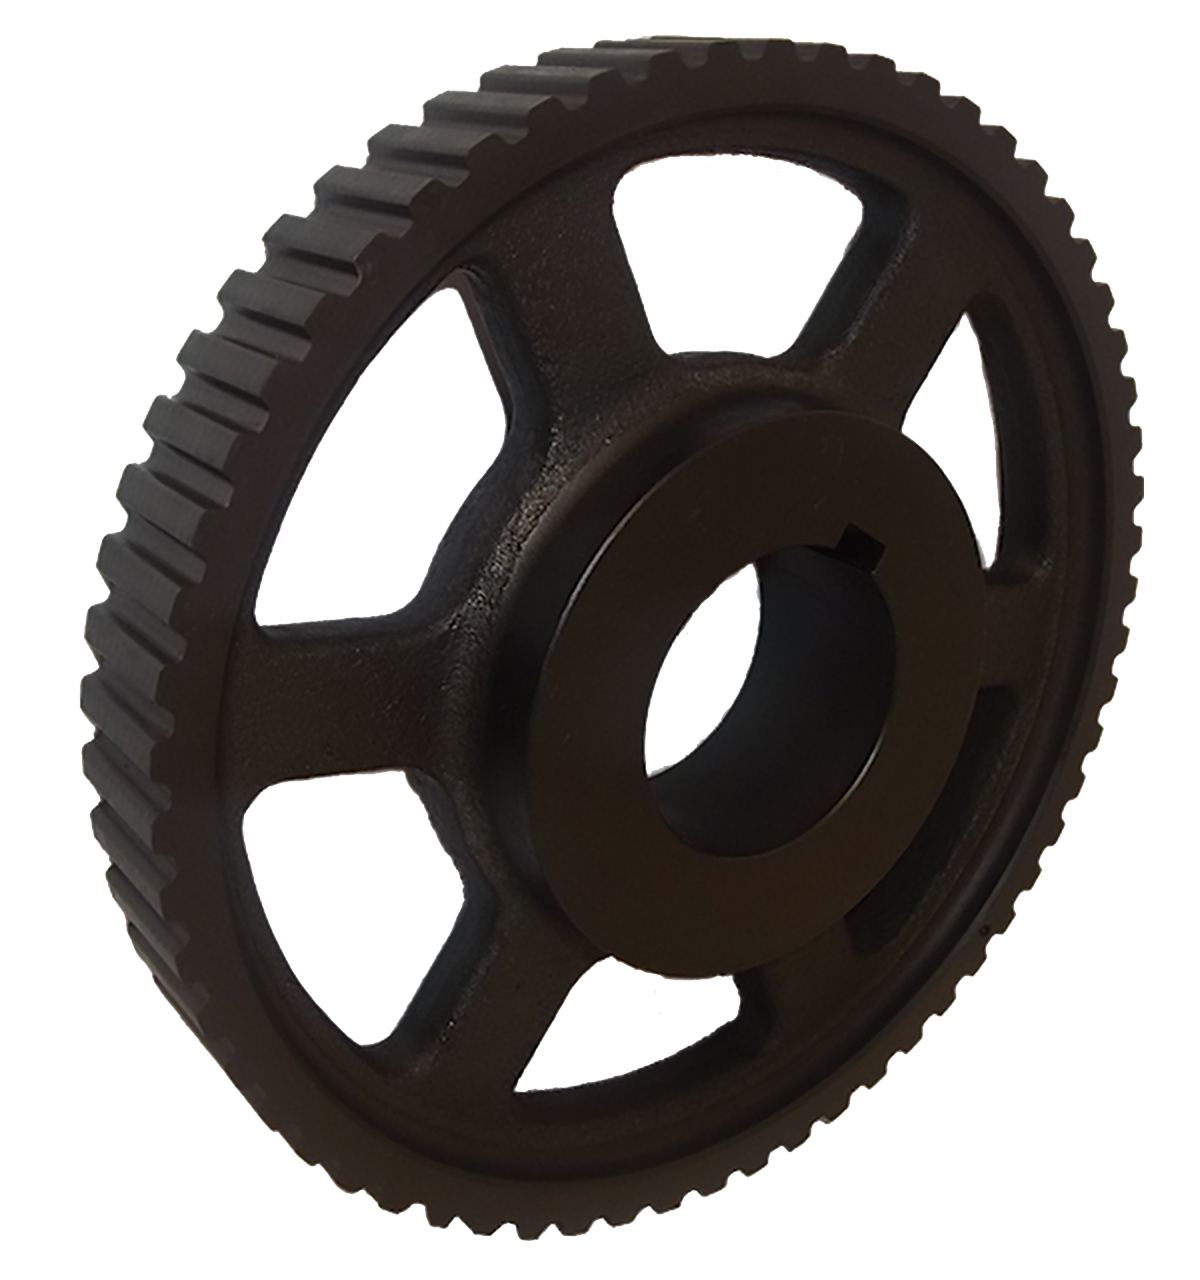 60LP075 - Cast Iron Imperial Pitch Pulleys